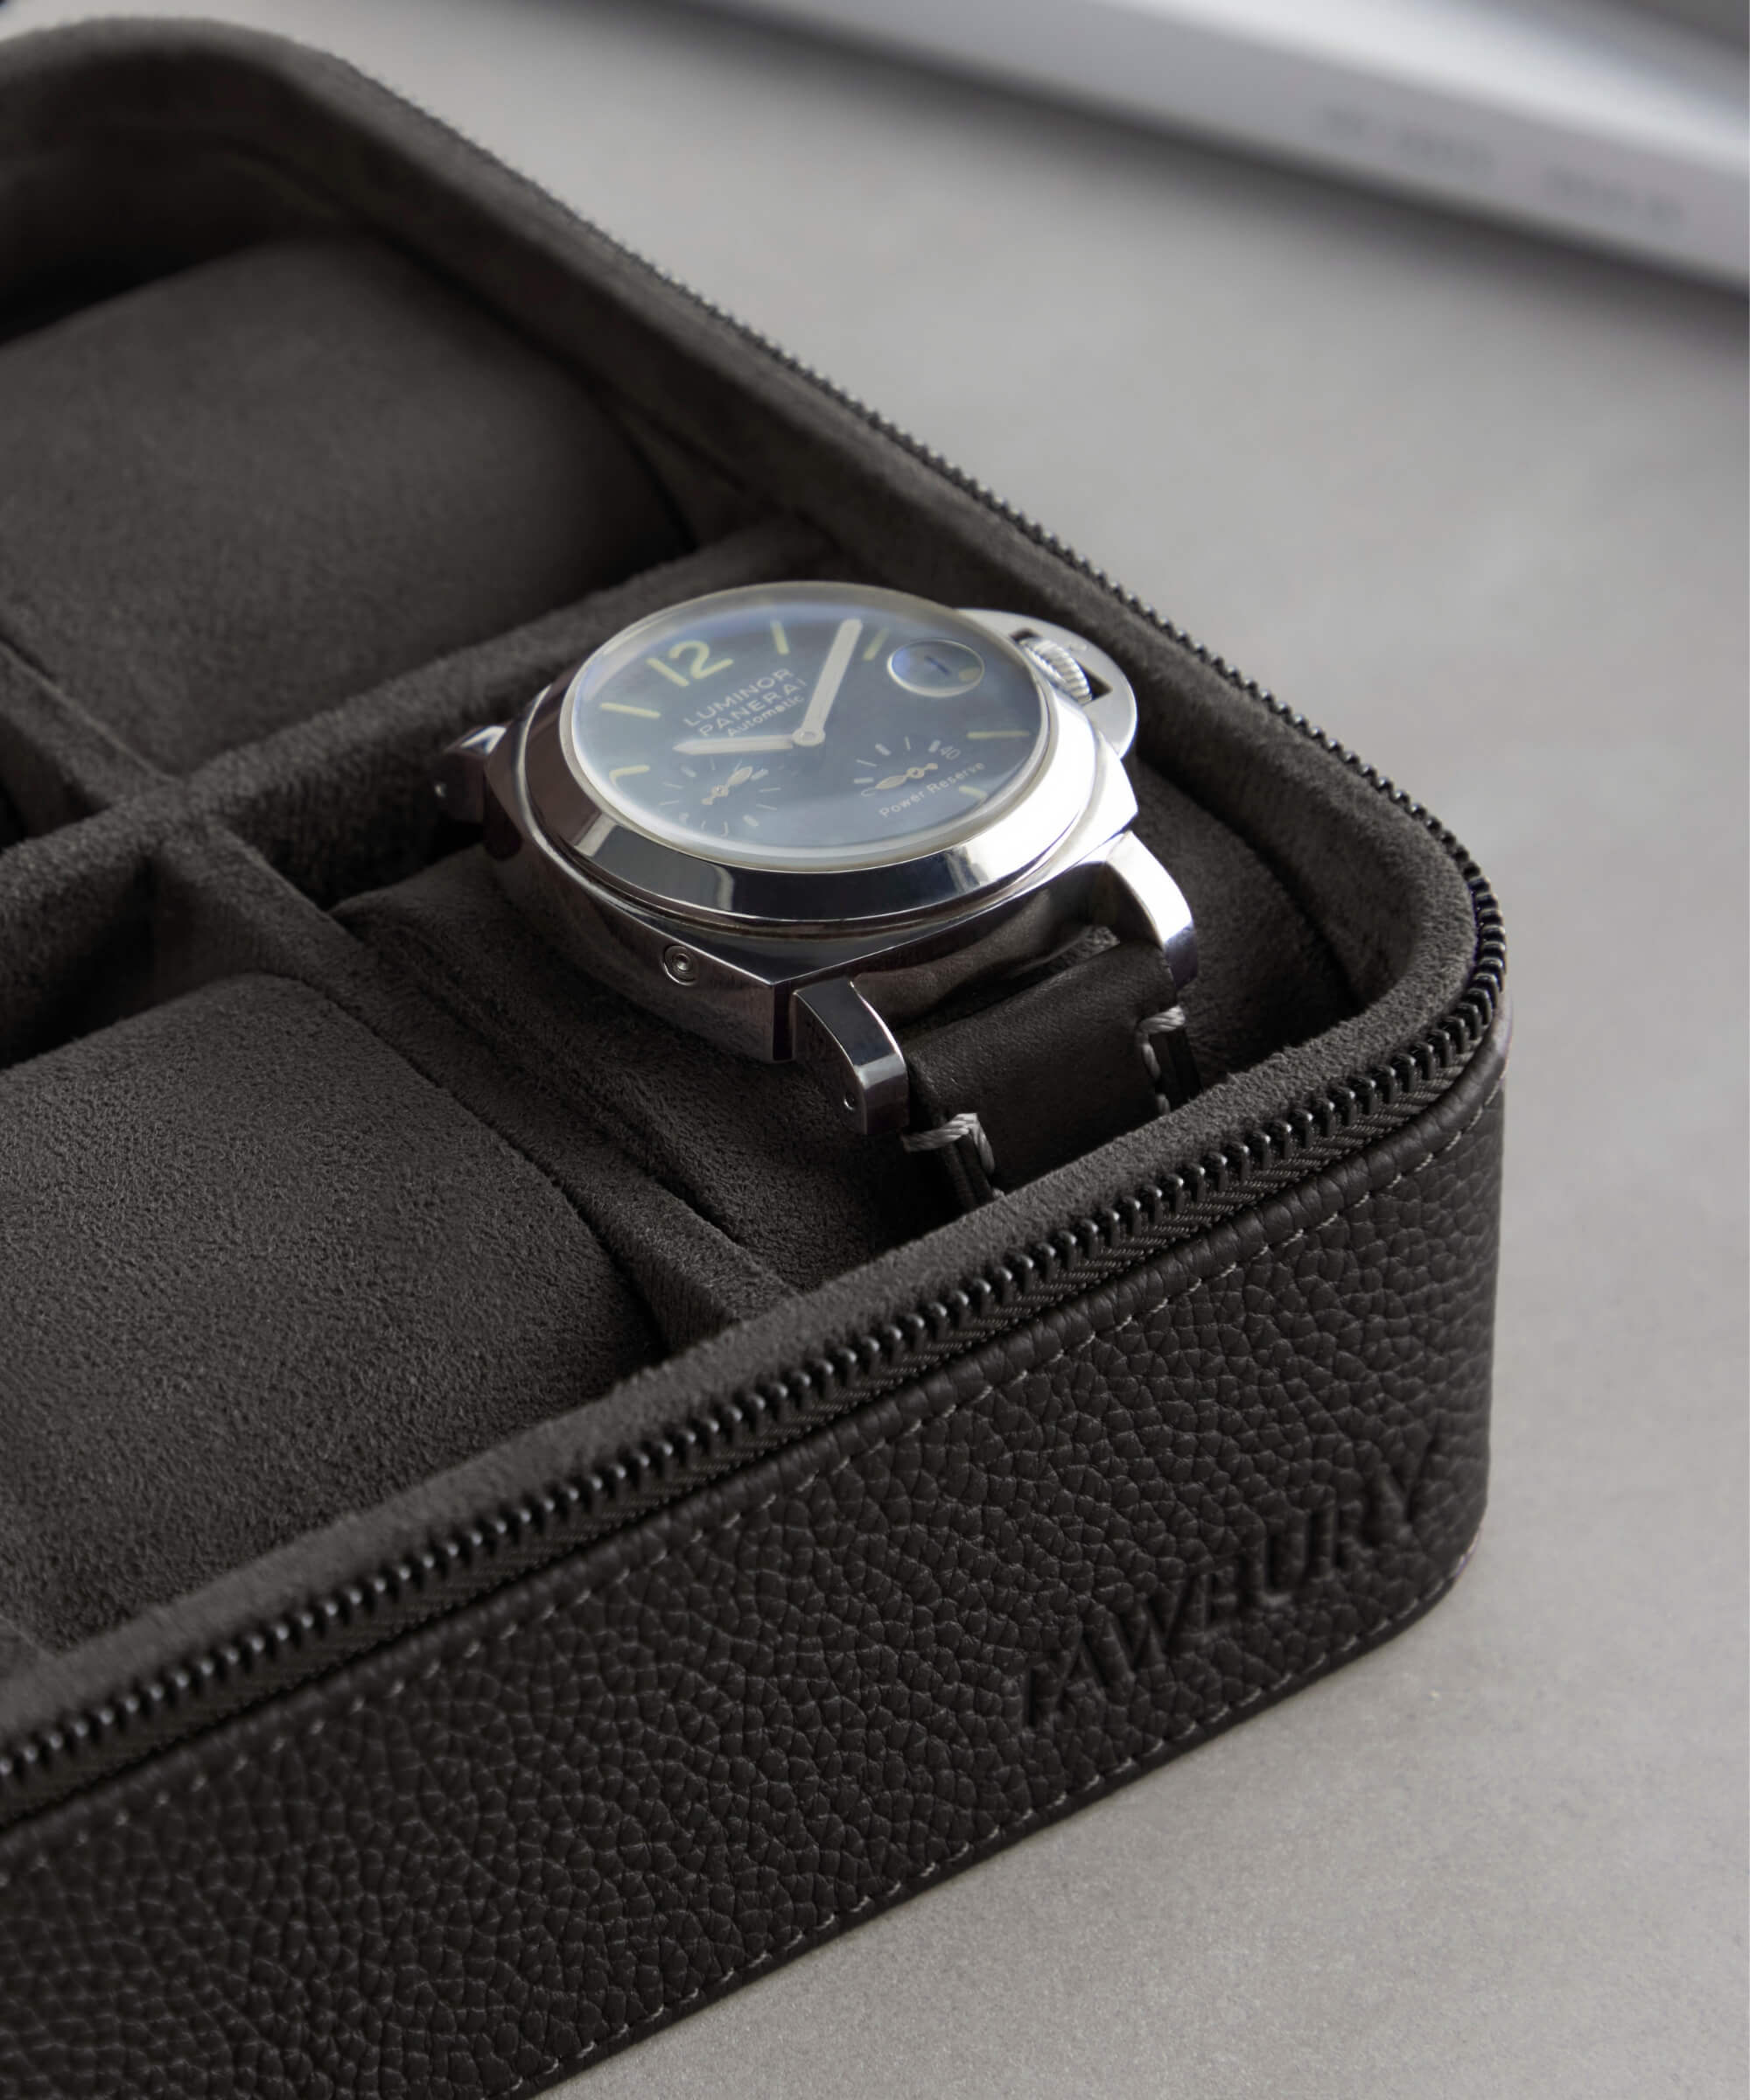 A wristwatch with a black band rests in a sleek leather watch case with a partially unzipped lid and the brand name "TAWBURY" embossed on the case, part of the distinguished Fraser 4 Watch Travel Case - Black (Coming Soon) collection.